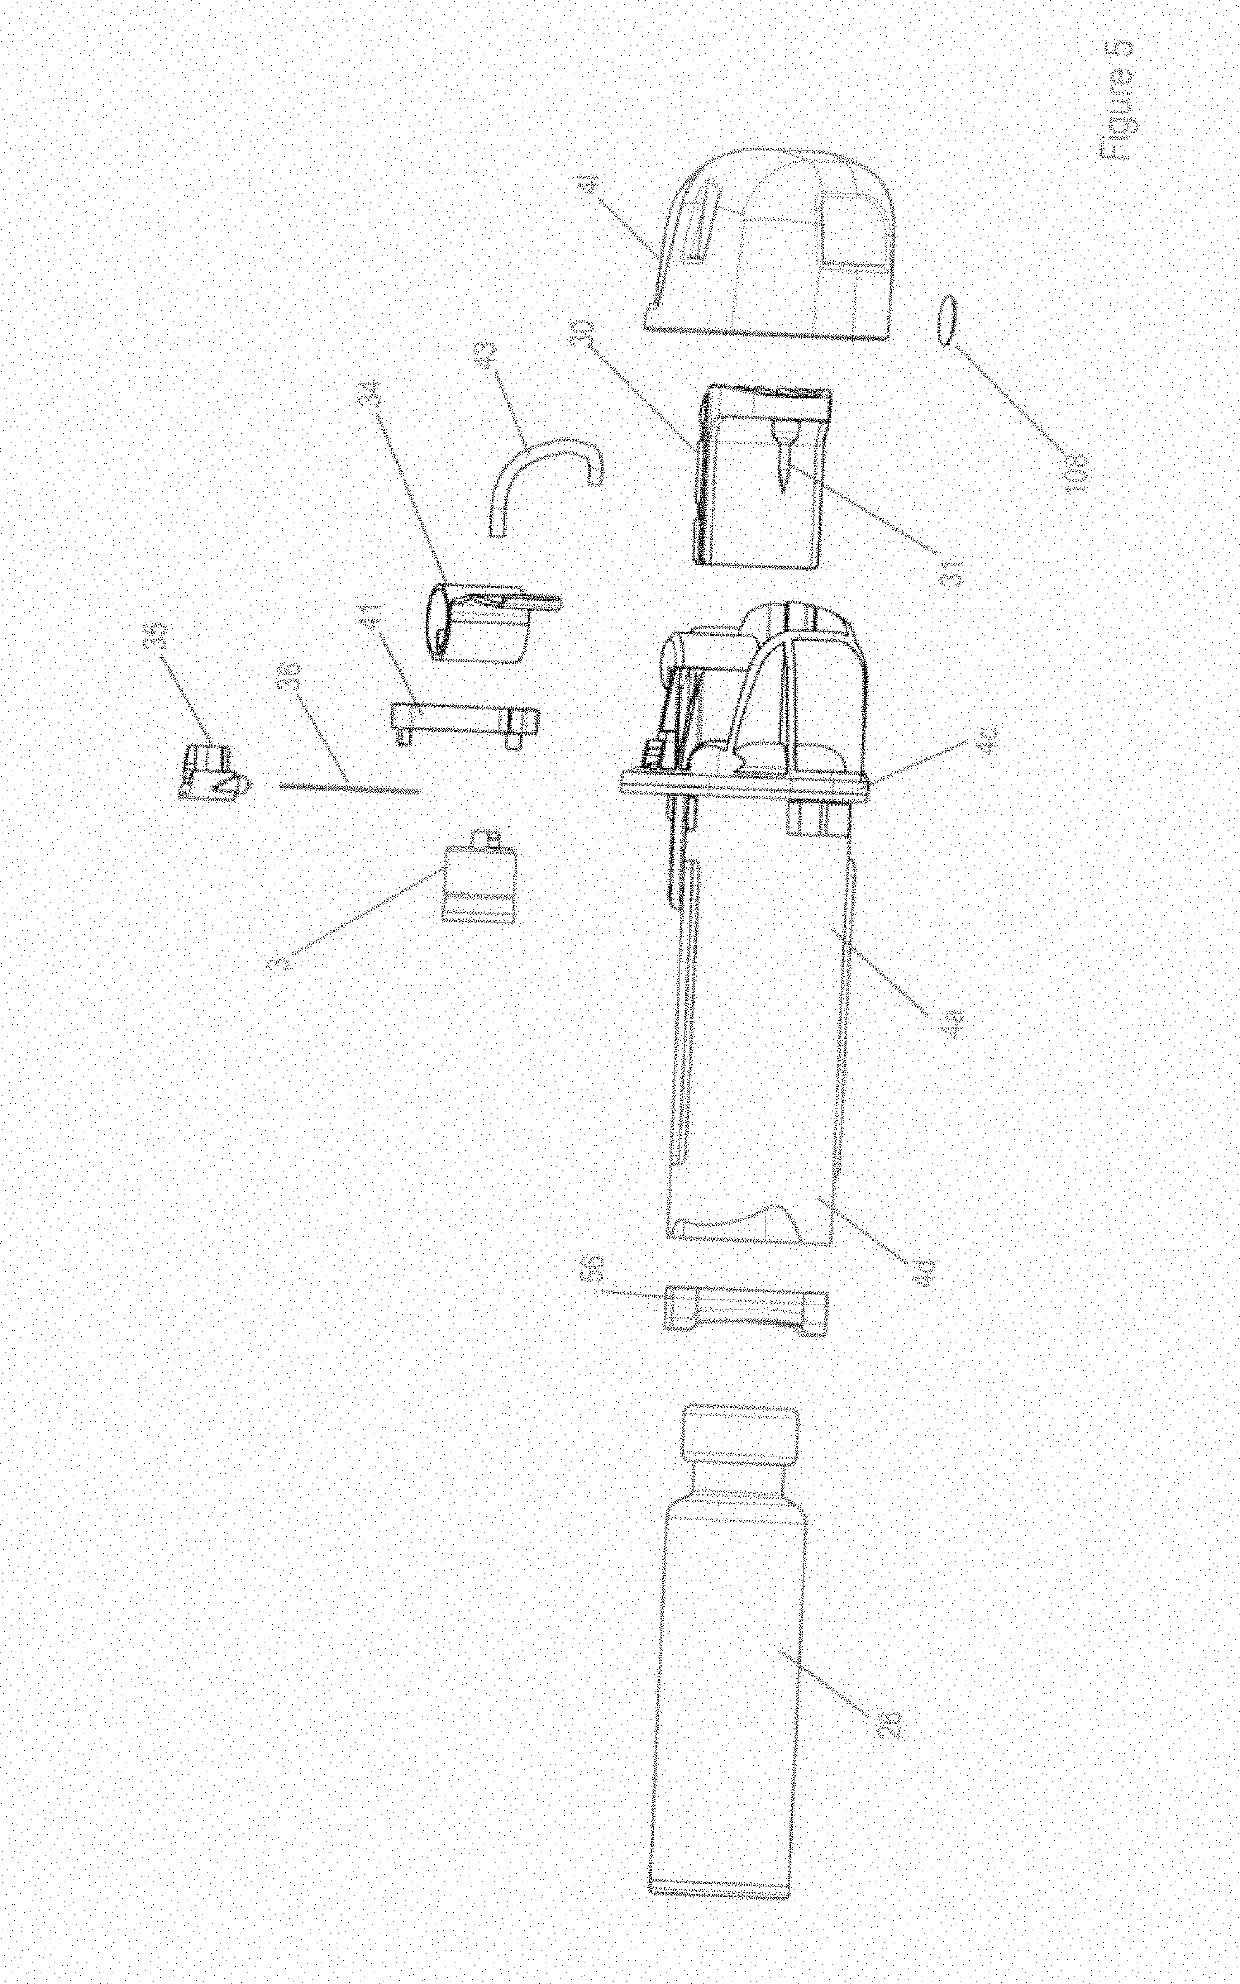 Segmented piston rod for a medication delivery device